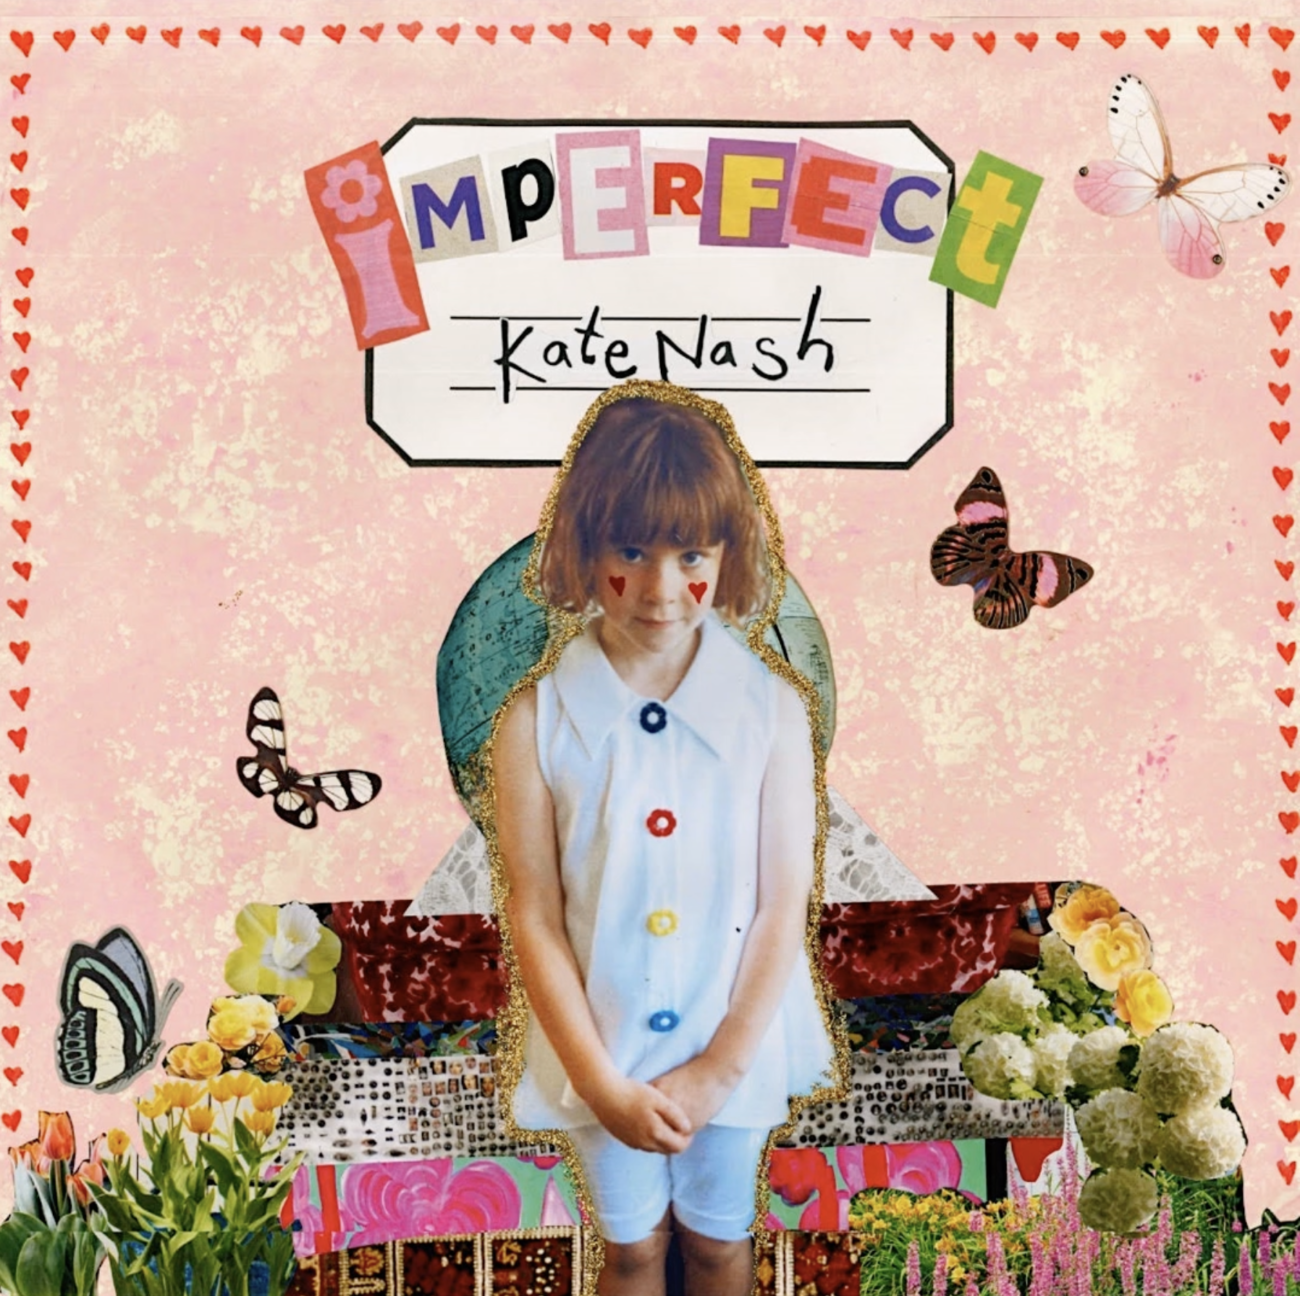 Kate Nash - Imperfect